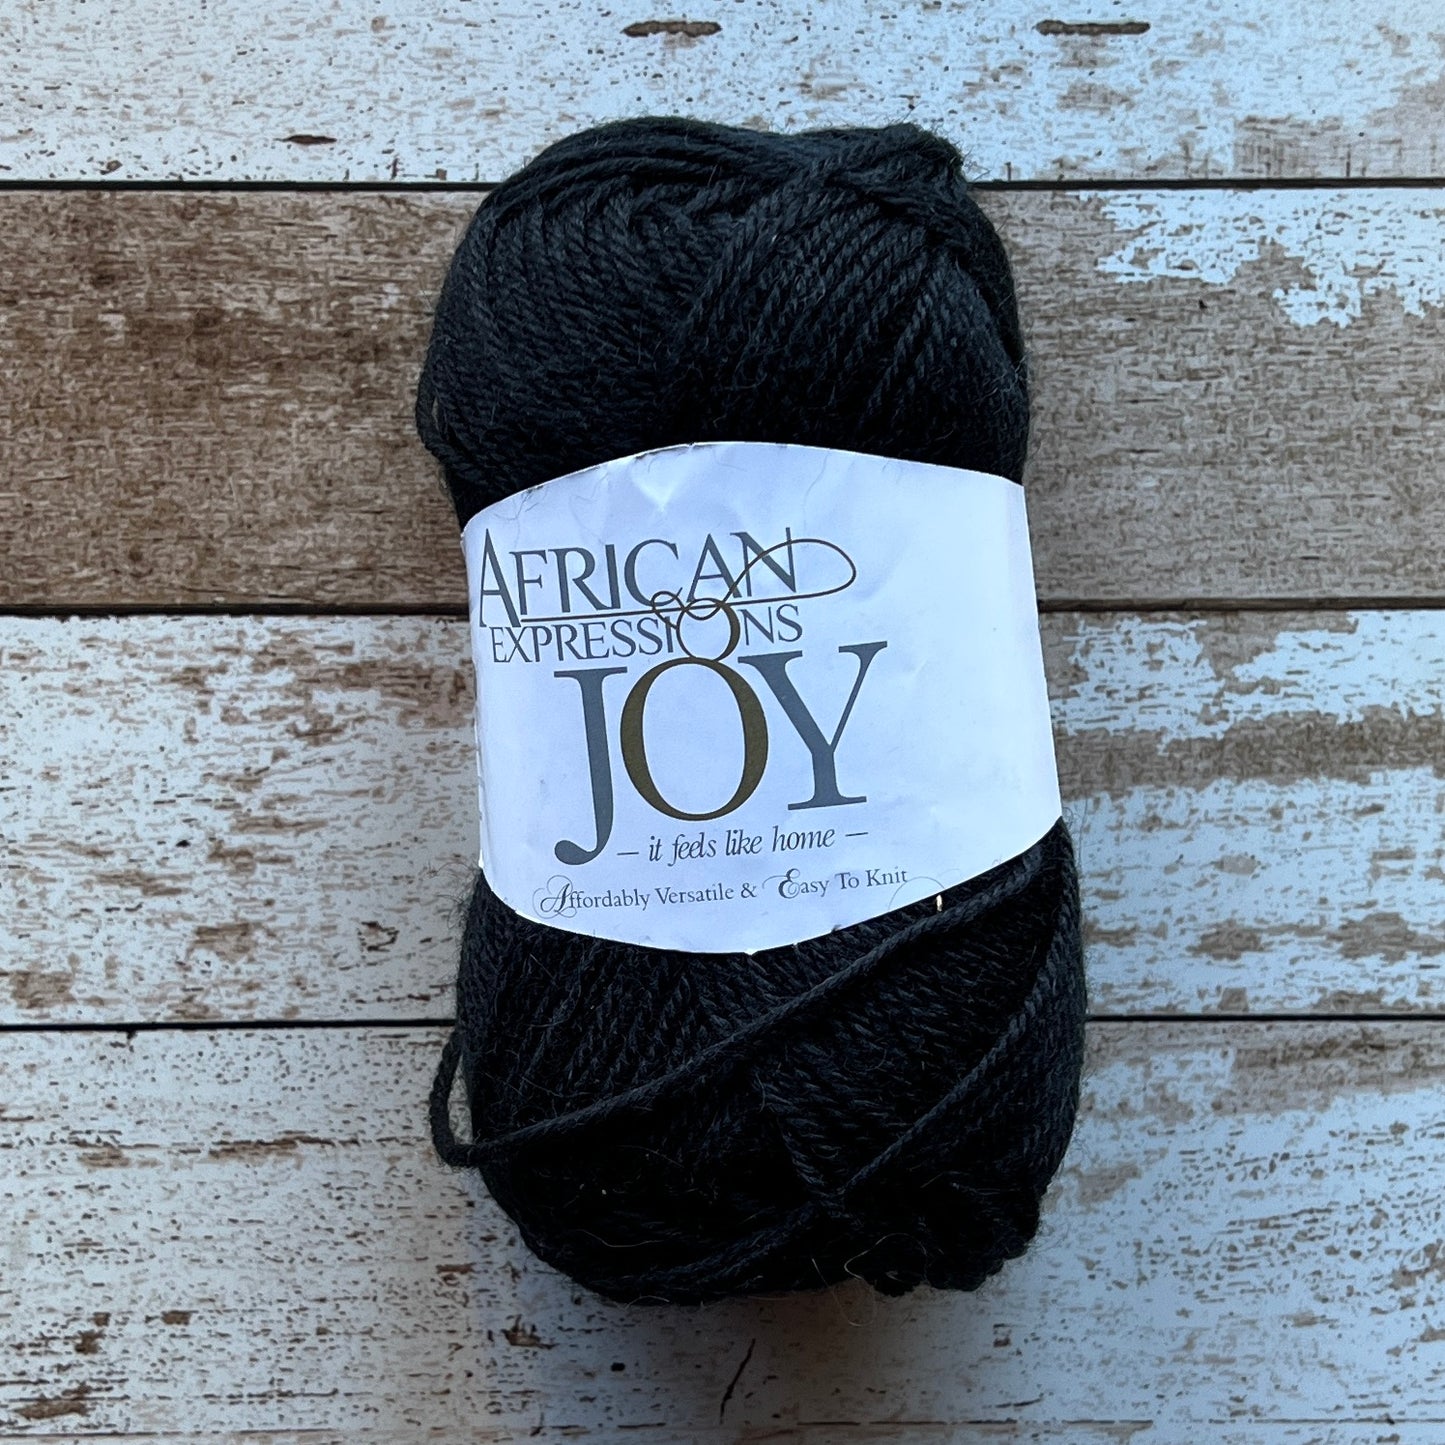 African Expressions - Joy